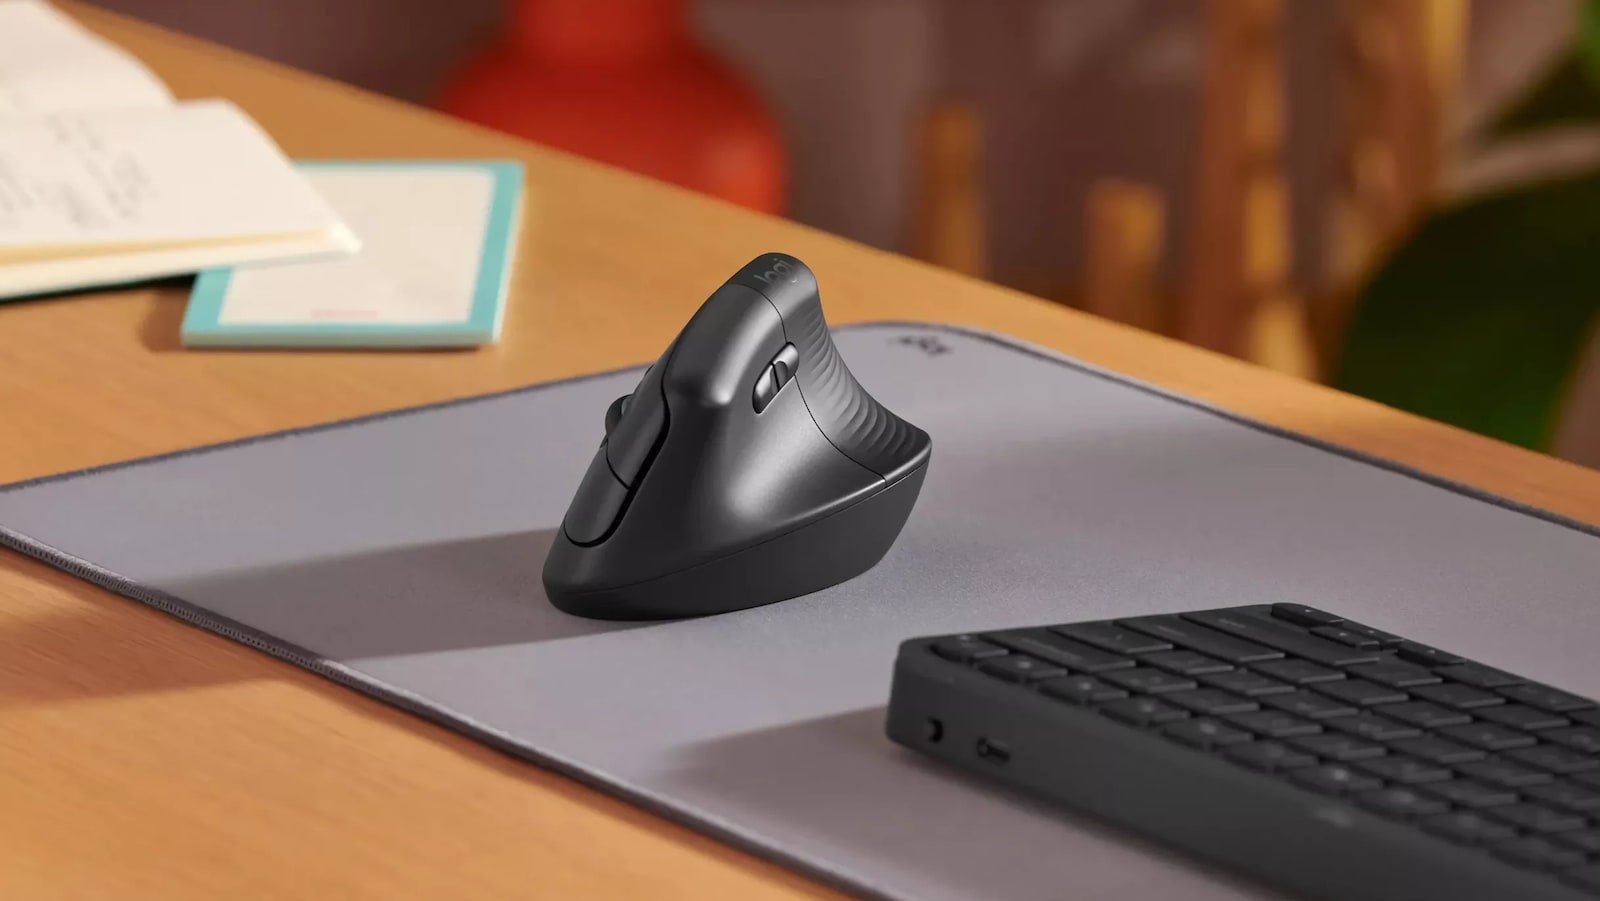 Logitech Lift Vertical Ergonomic Mouse offers a more natural posture for day-long comfort